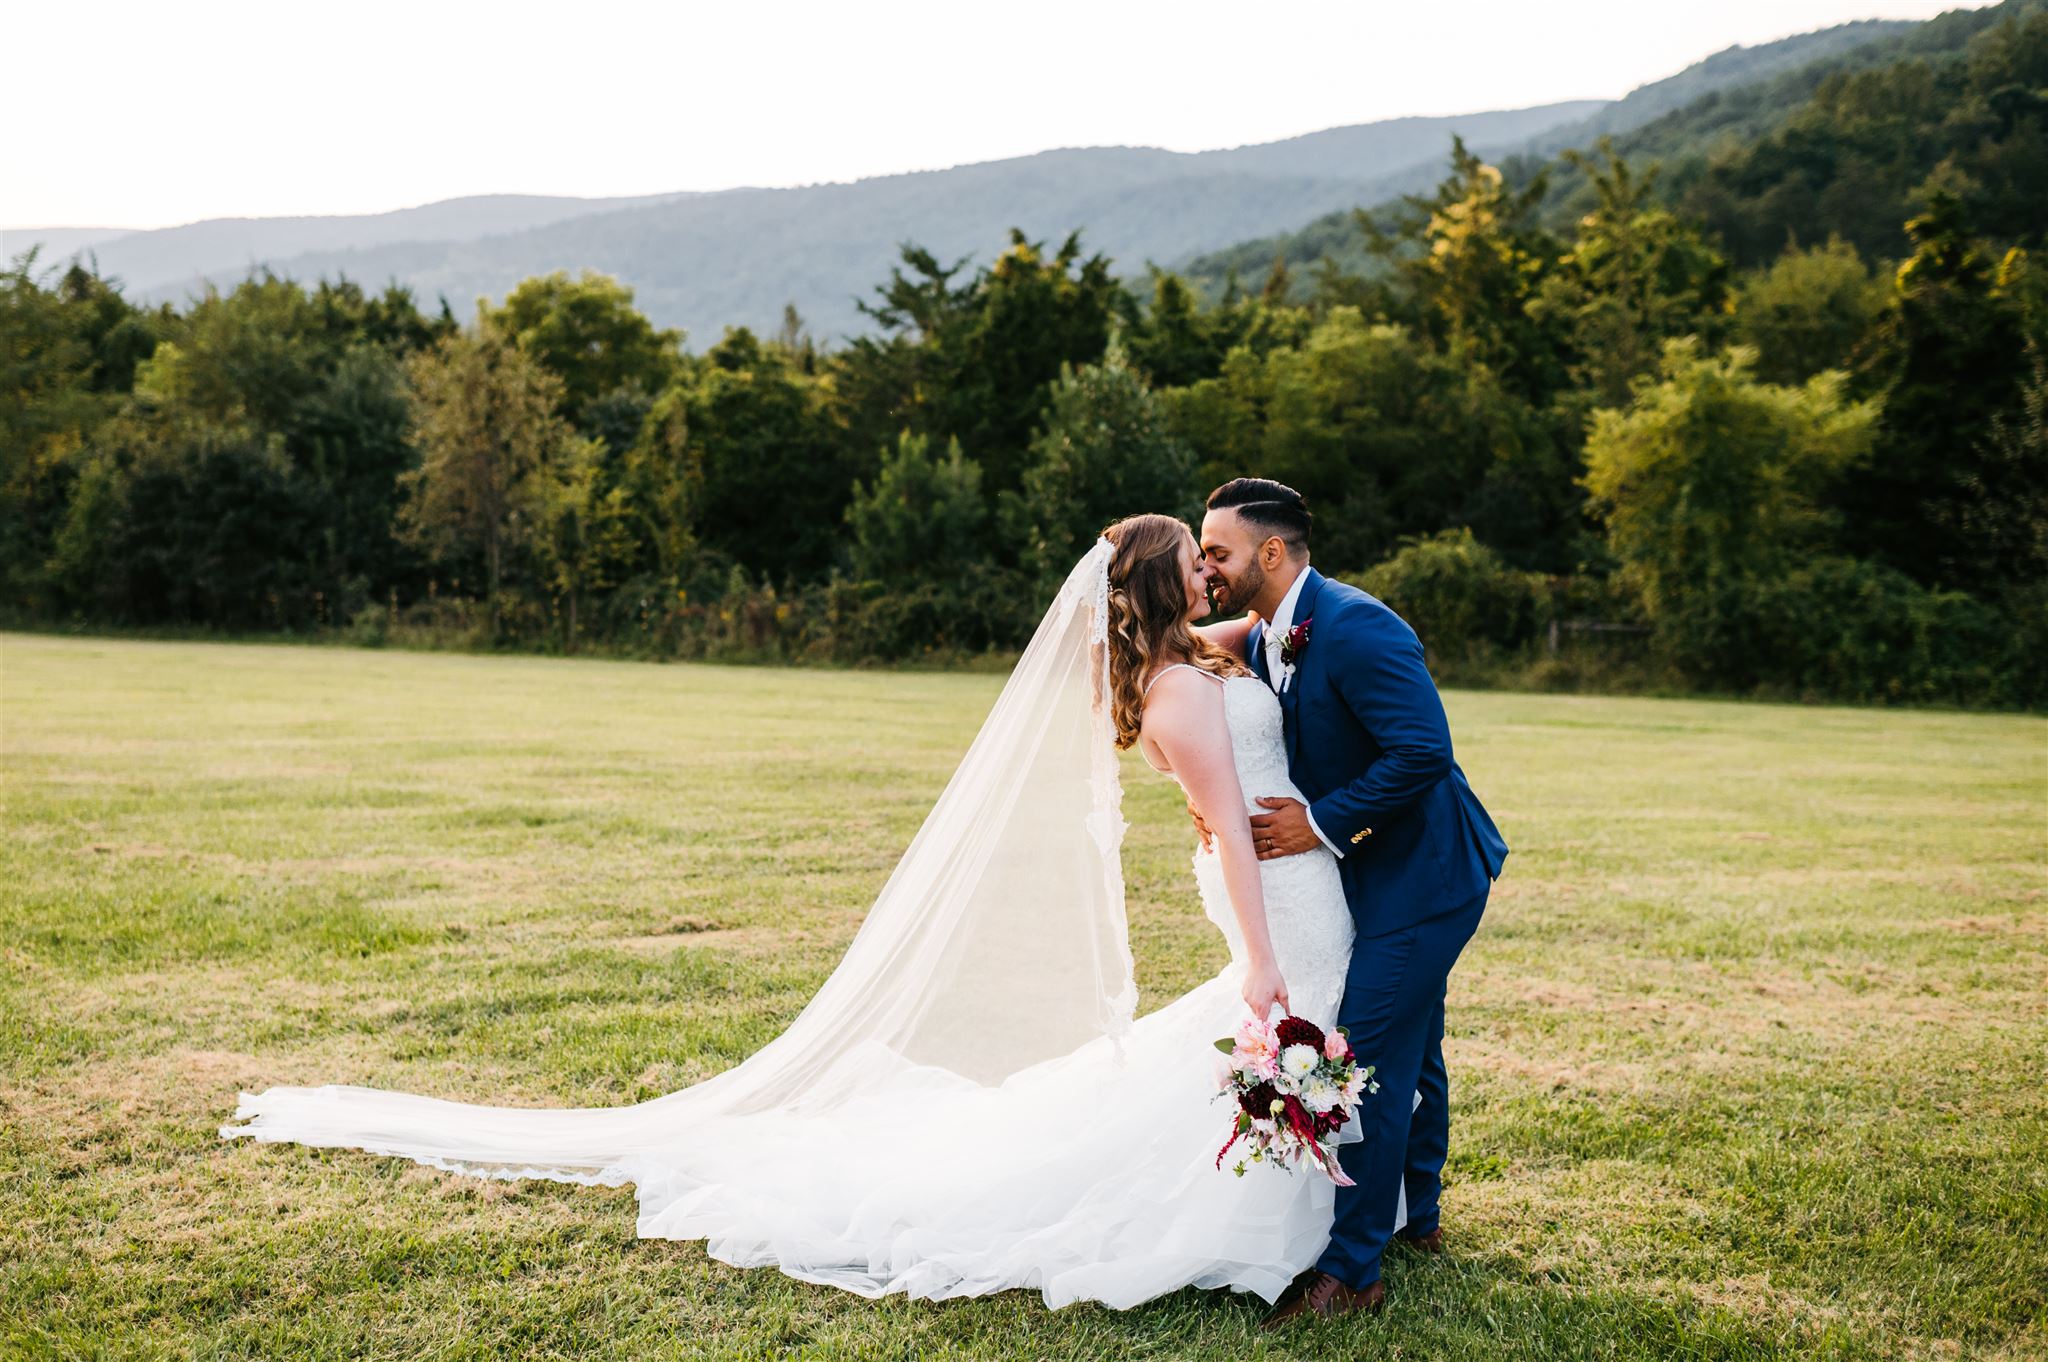 Shenandoah wedding with bride and groom in an open field with a sec tree line of evergreen forest behind them and mountains in the distance while the groom hold his bride by the waist and leans into her to kiss her passionately as she holds her wedding bouquet to her side captured by Virginia wedding photographer